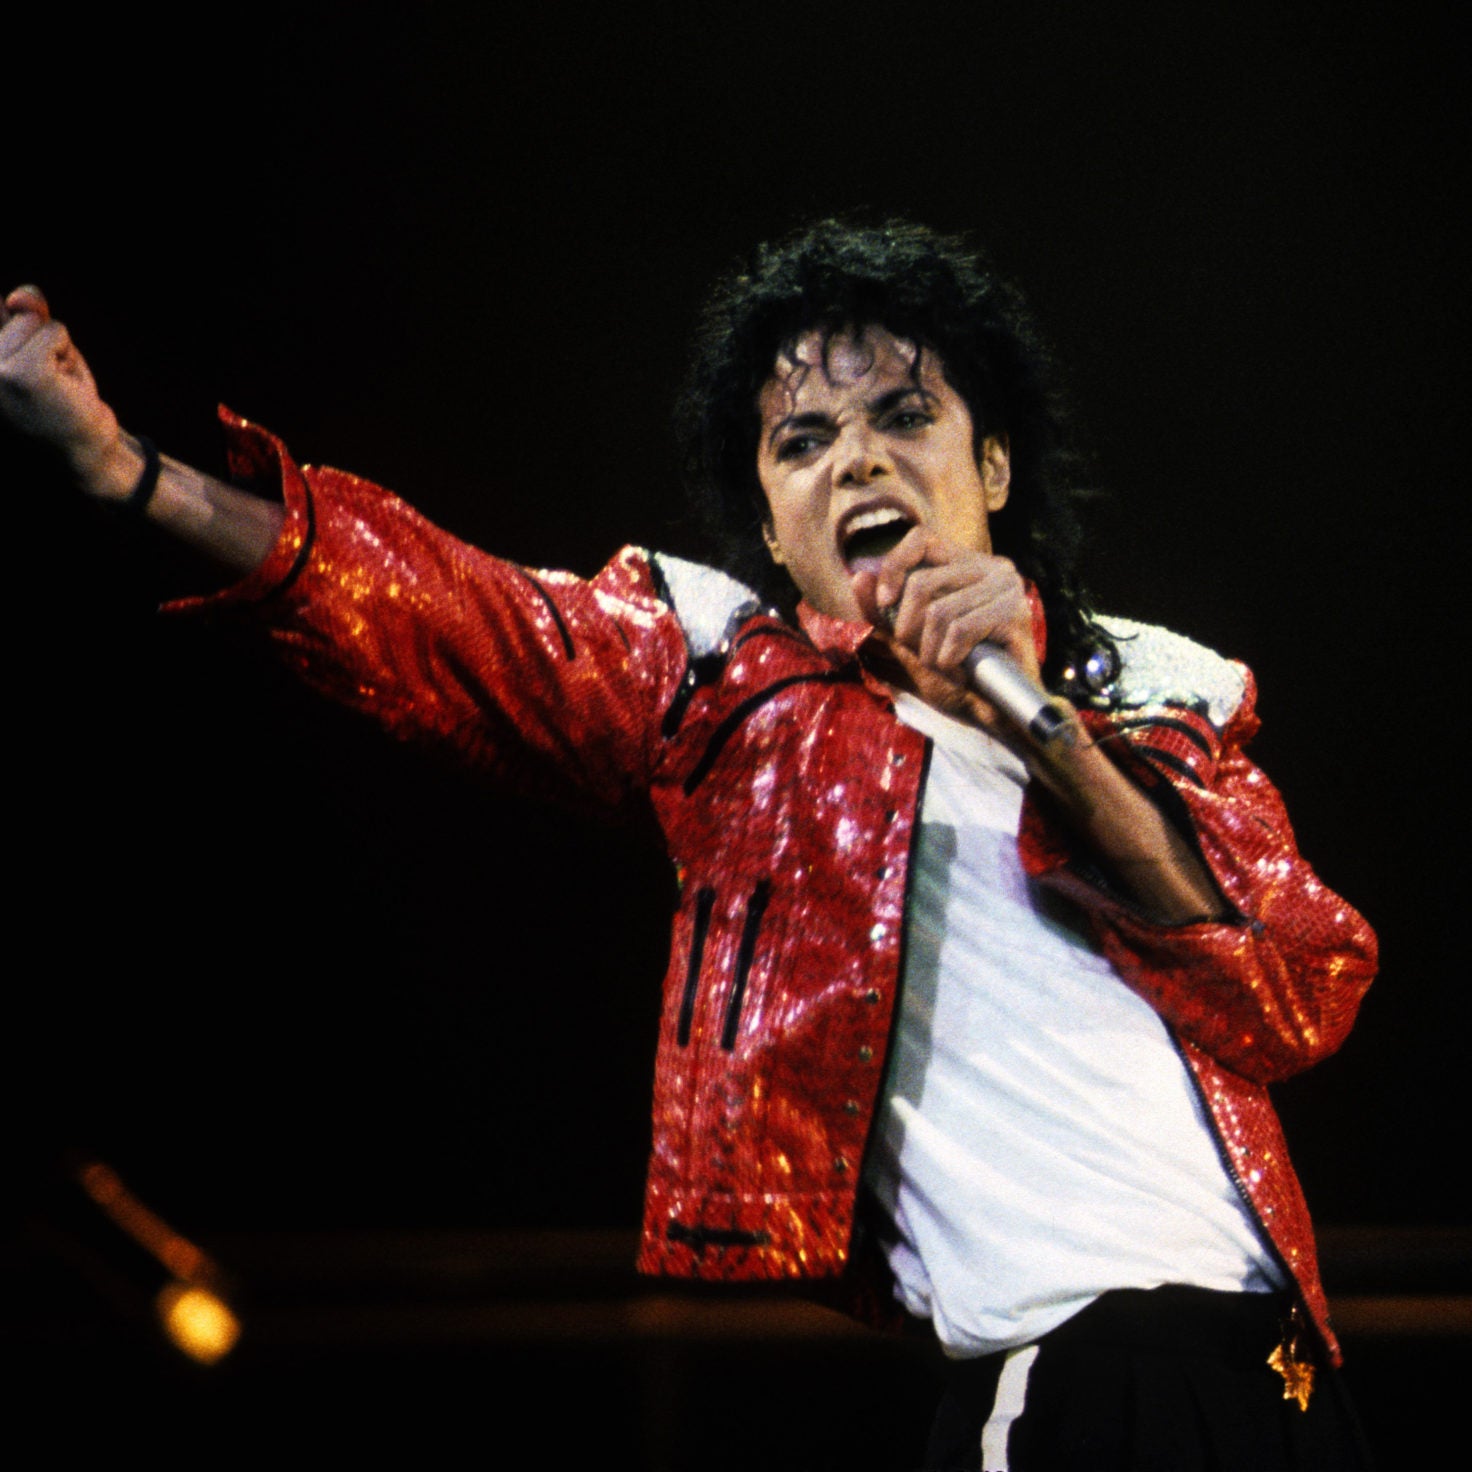 Michael Jackson Musical 'MJ' Gets Pushed Back to 2021